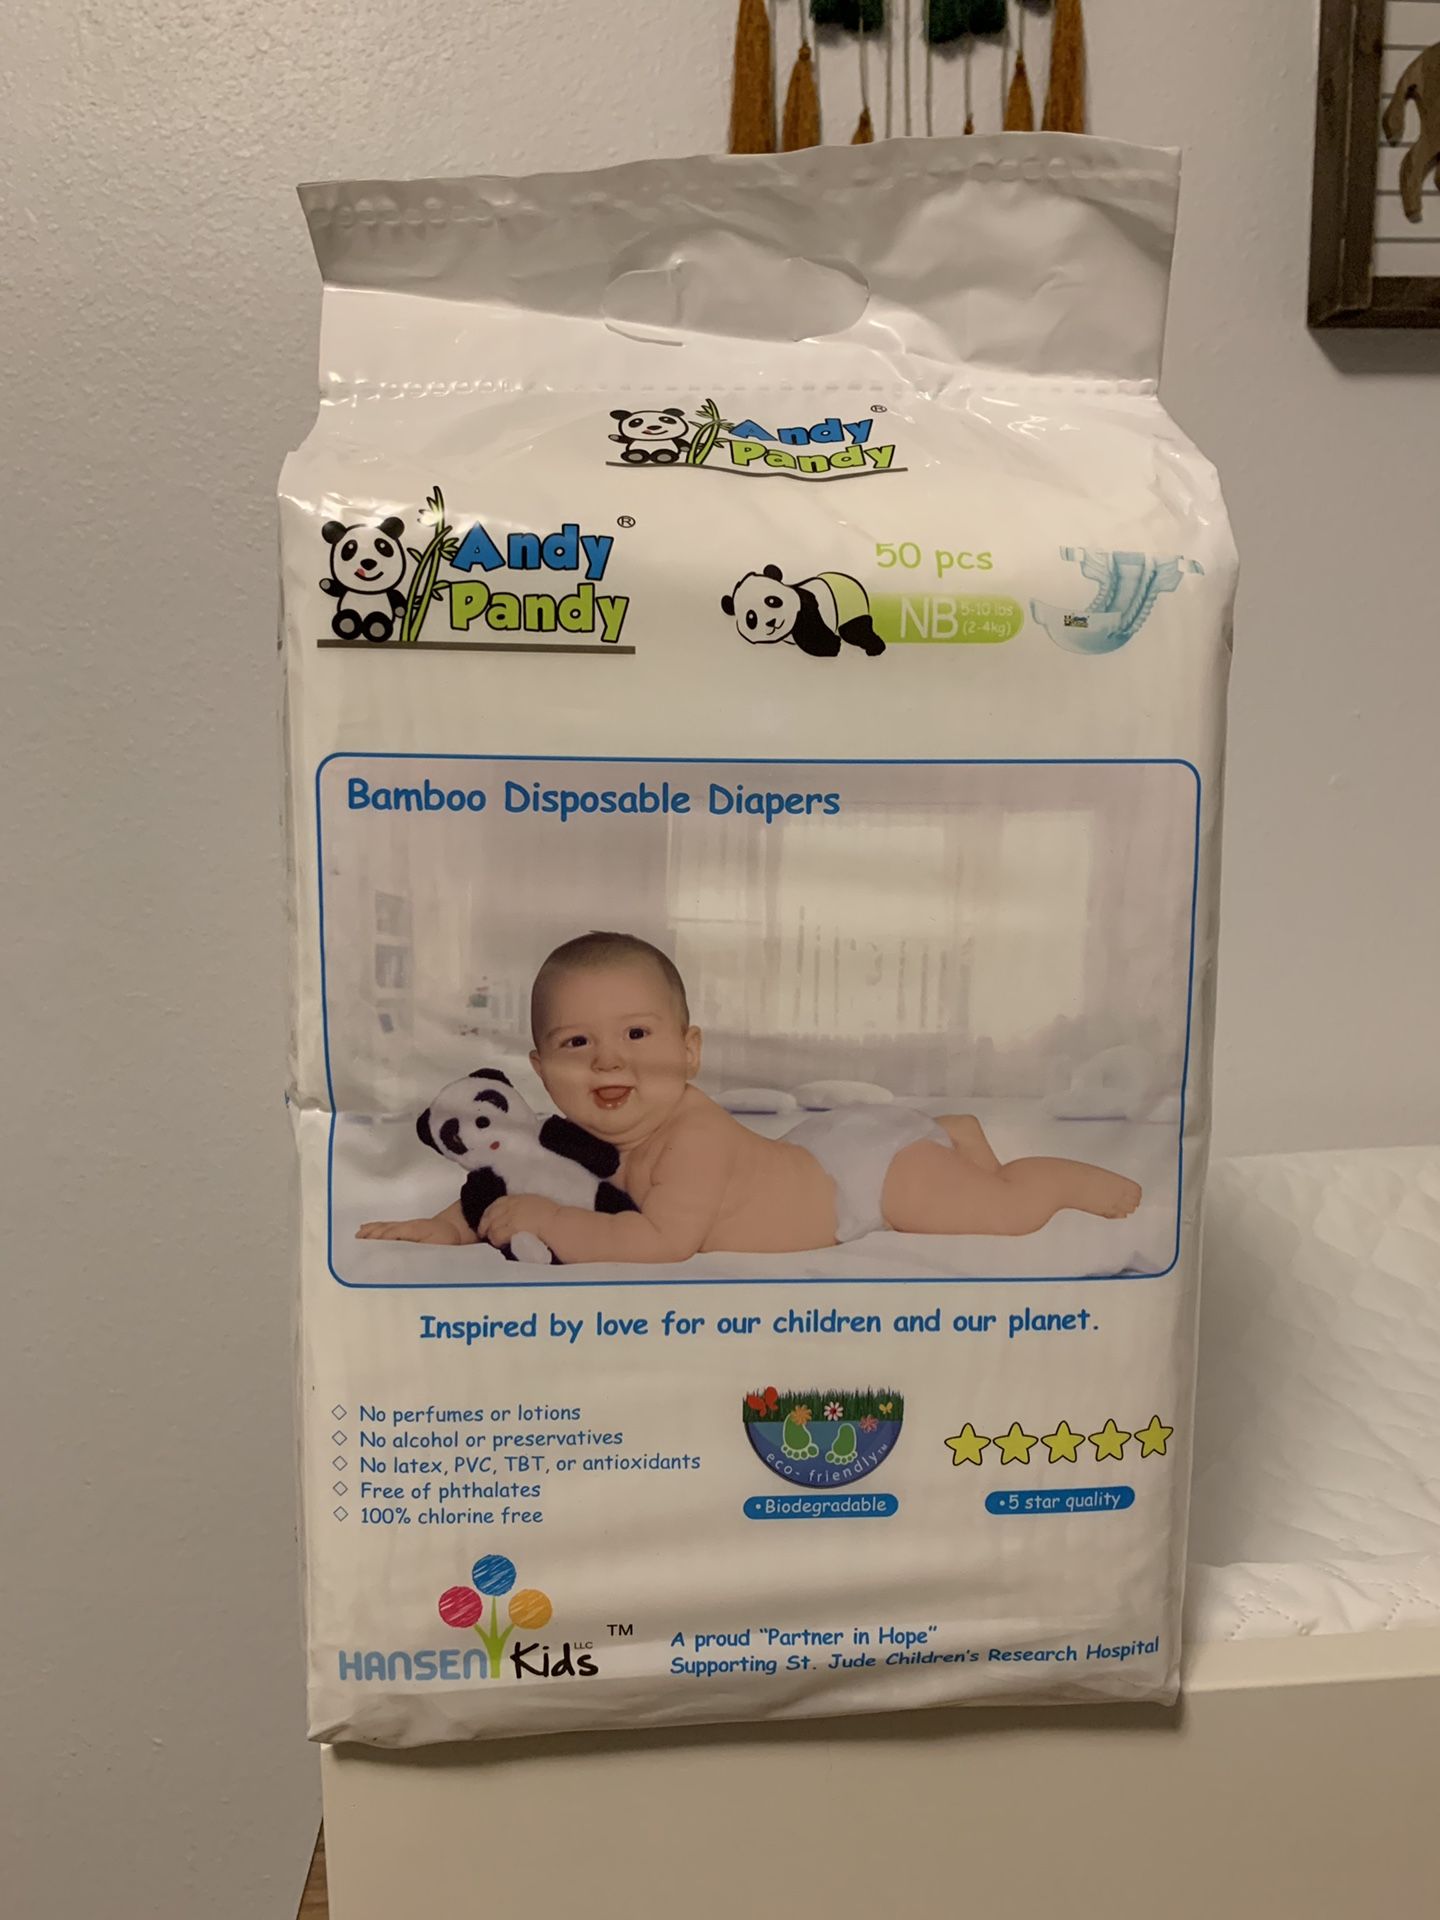 *NEW* Andy Pandy newborn biodegradable diapers